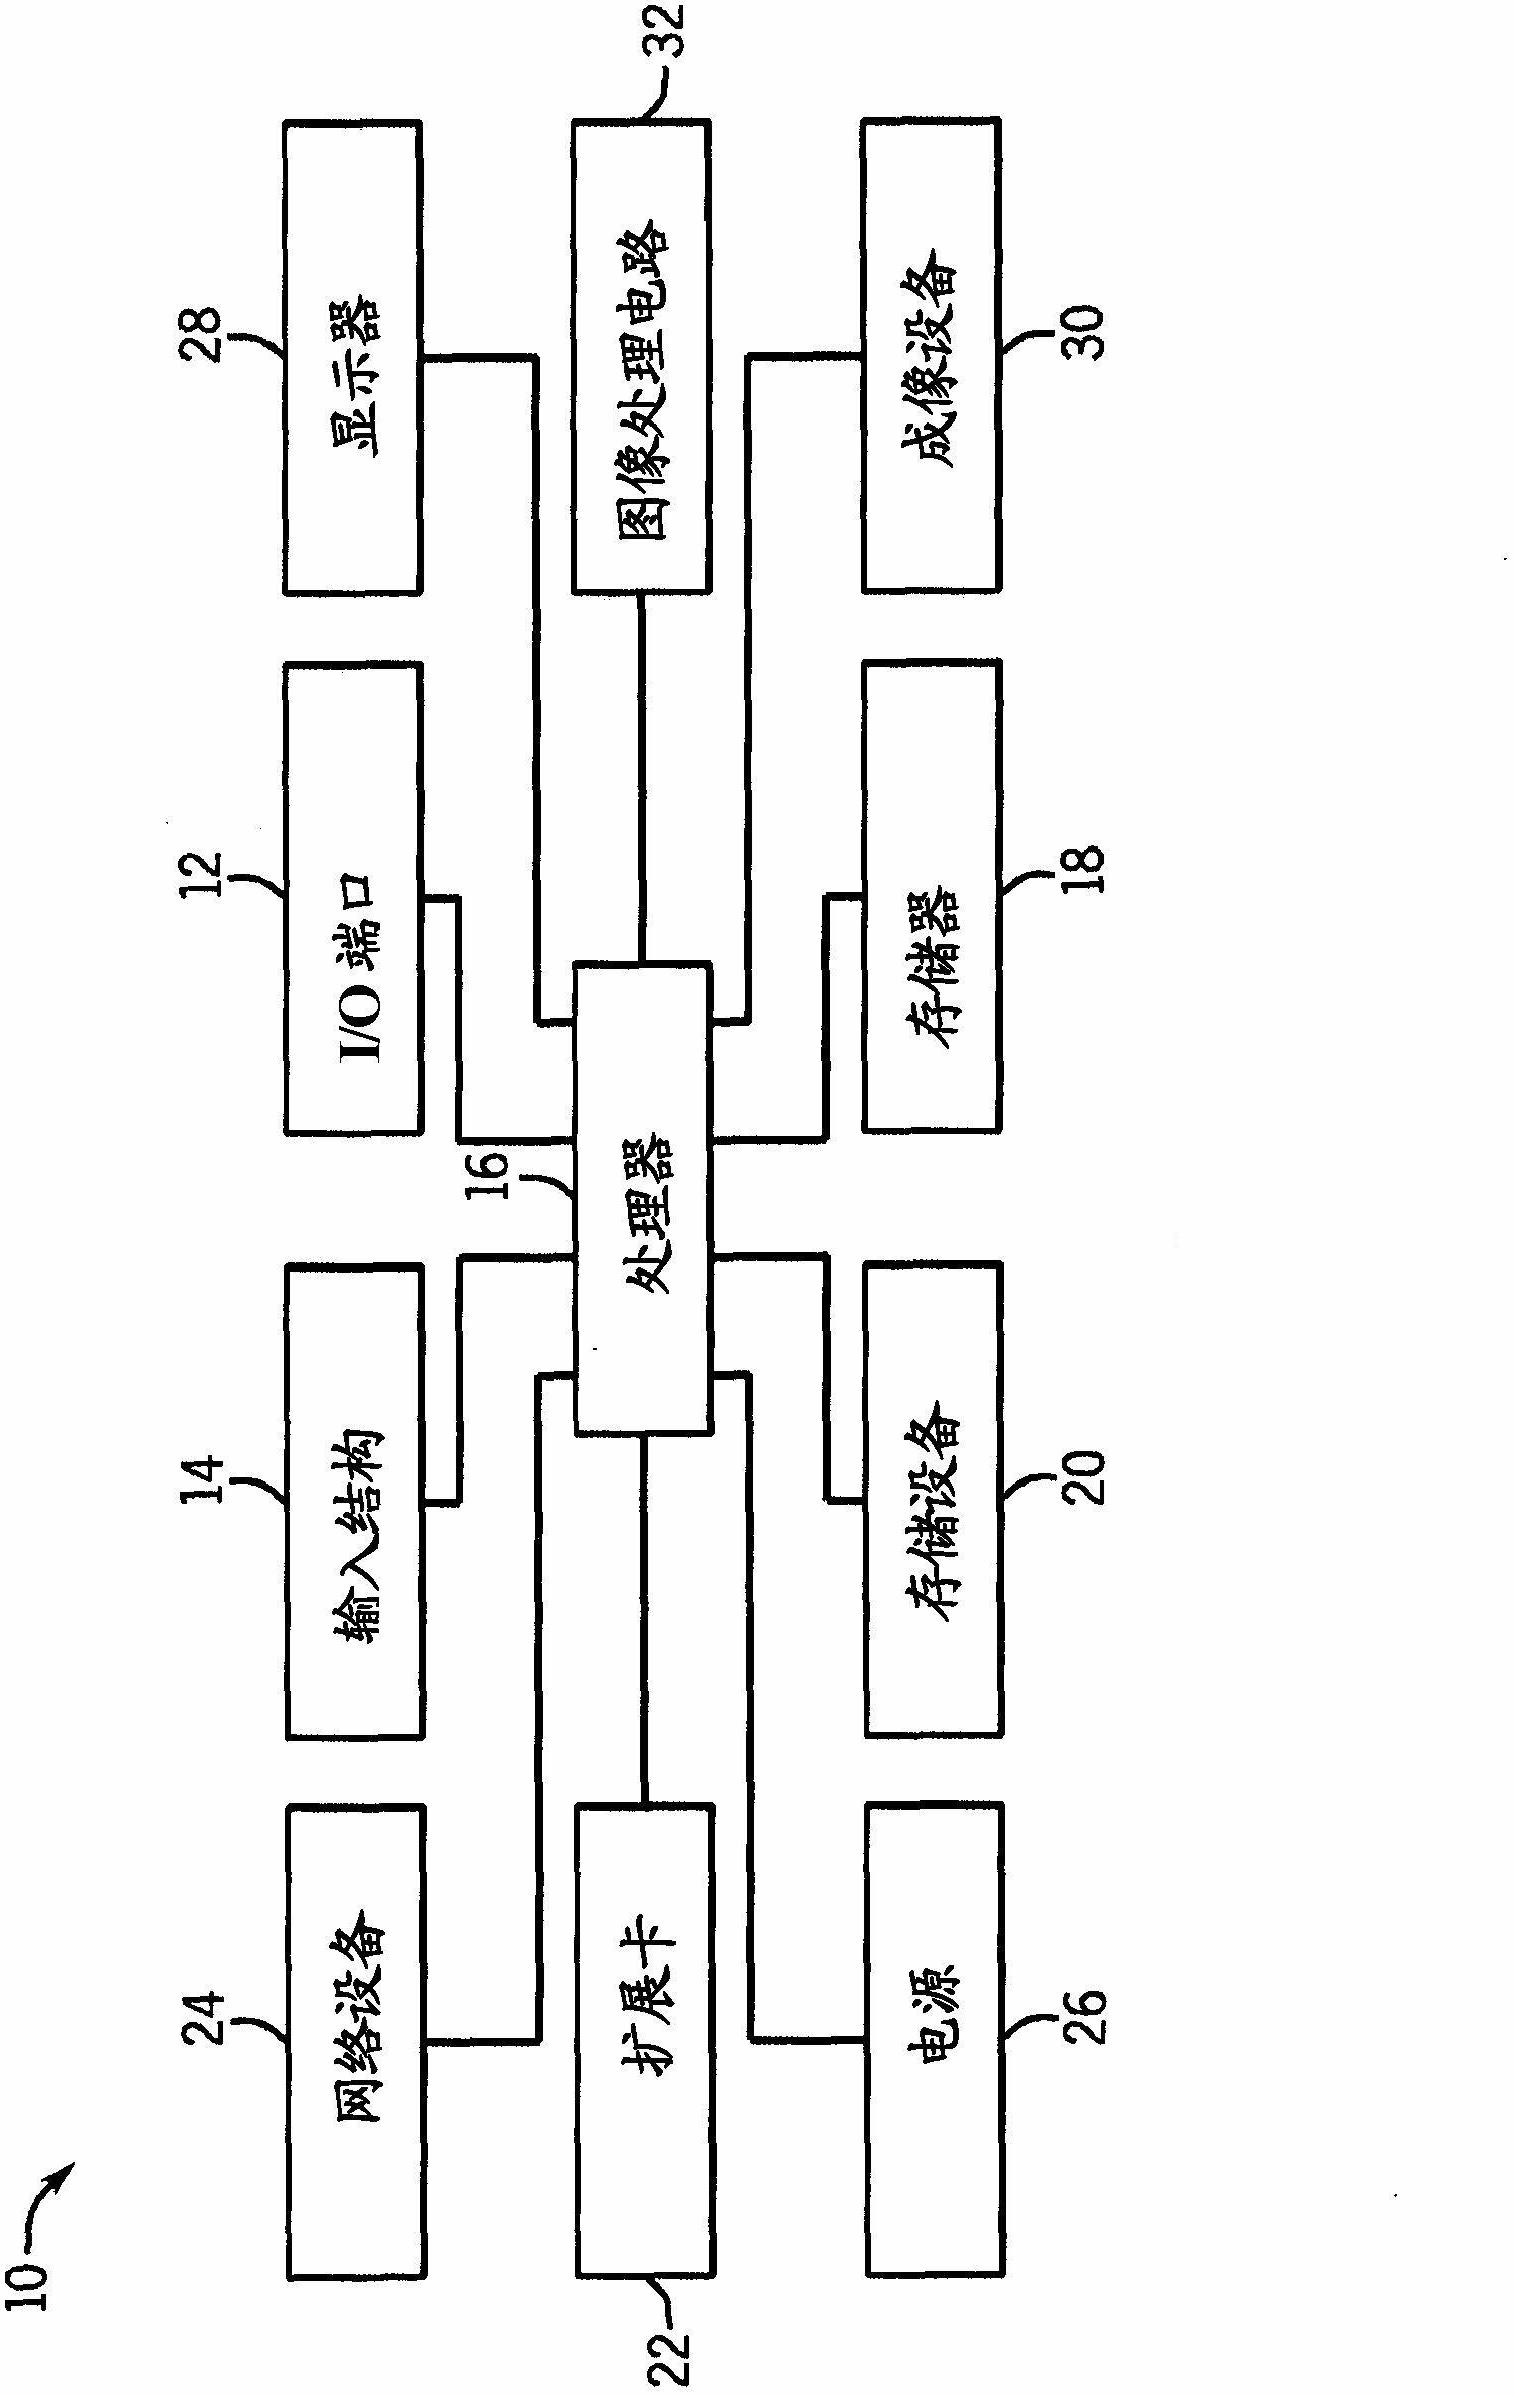 System and method for demosaicing image data using weighted gradients